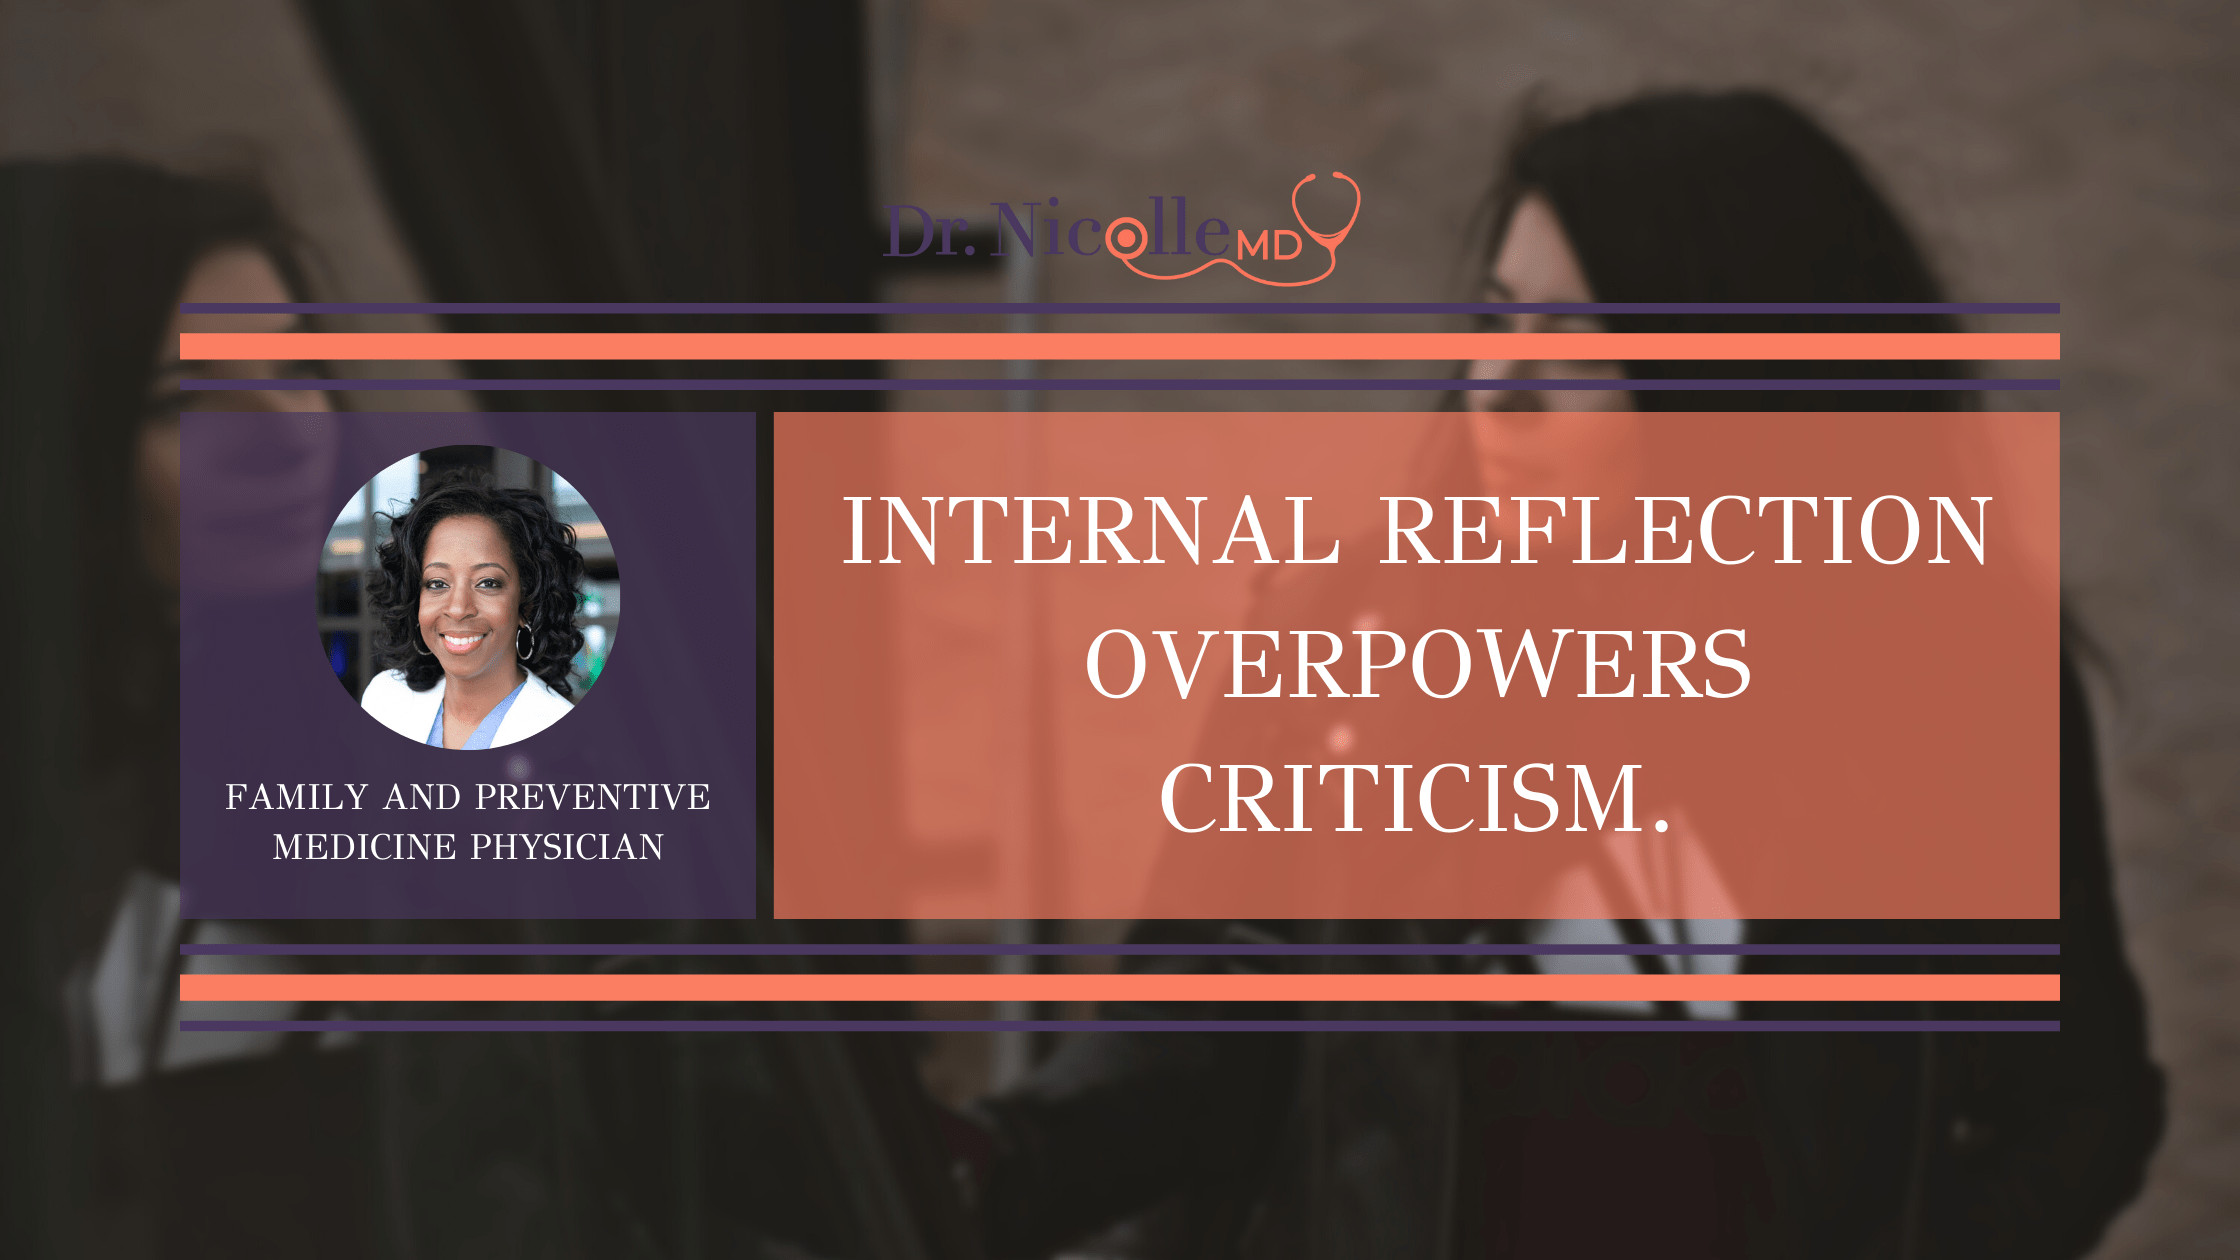 11Internal reflection overpowers criticism.